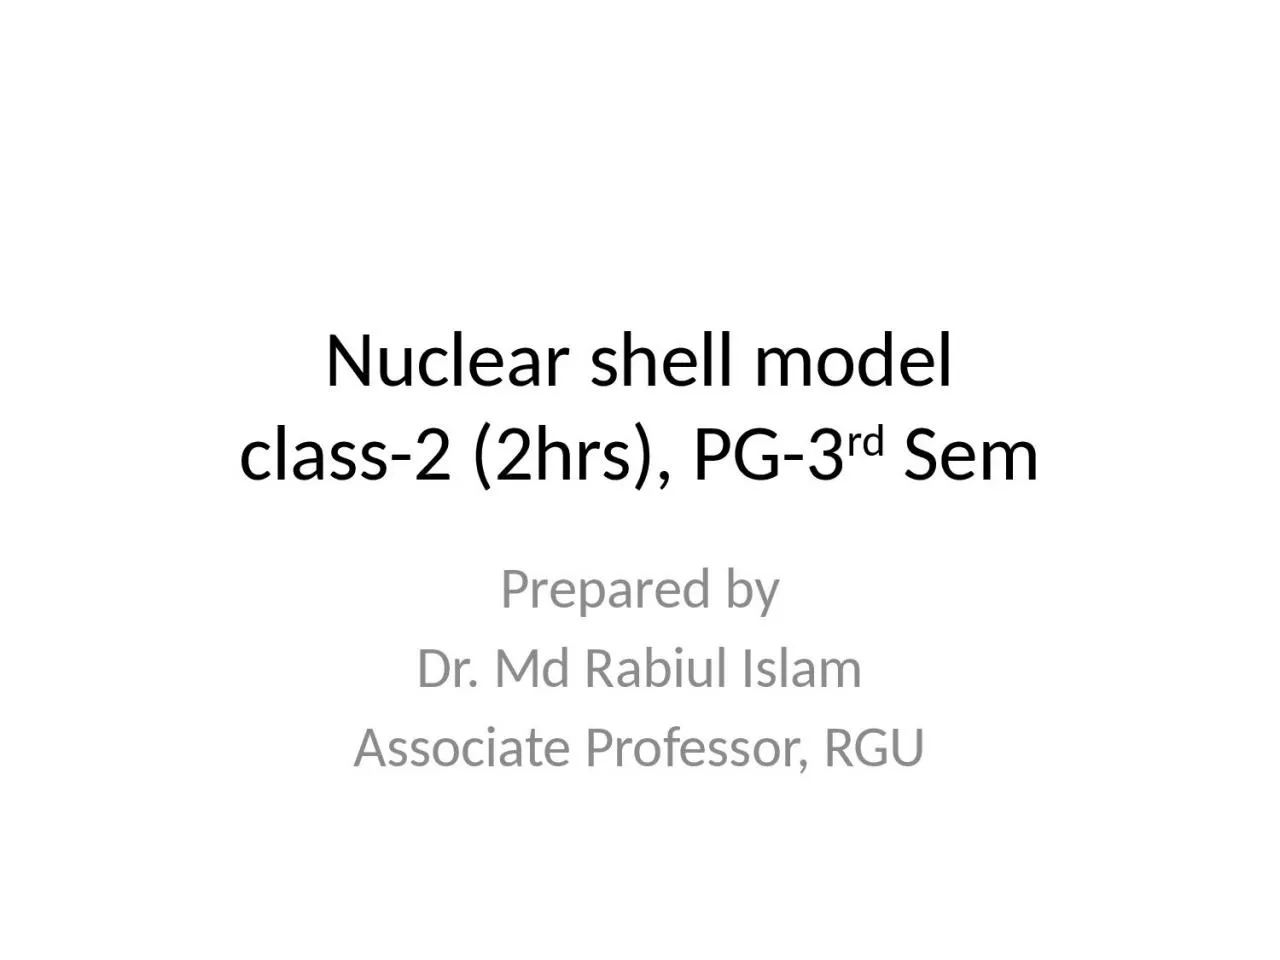 Nuclear shell model class-2 (2hrs), PG-3